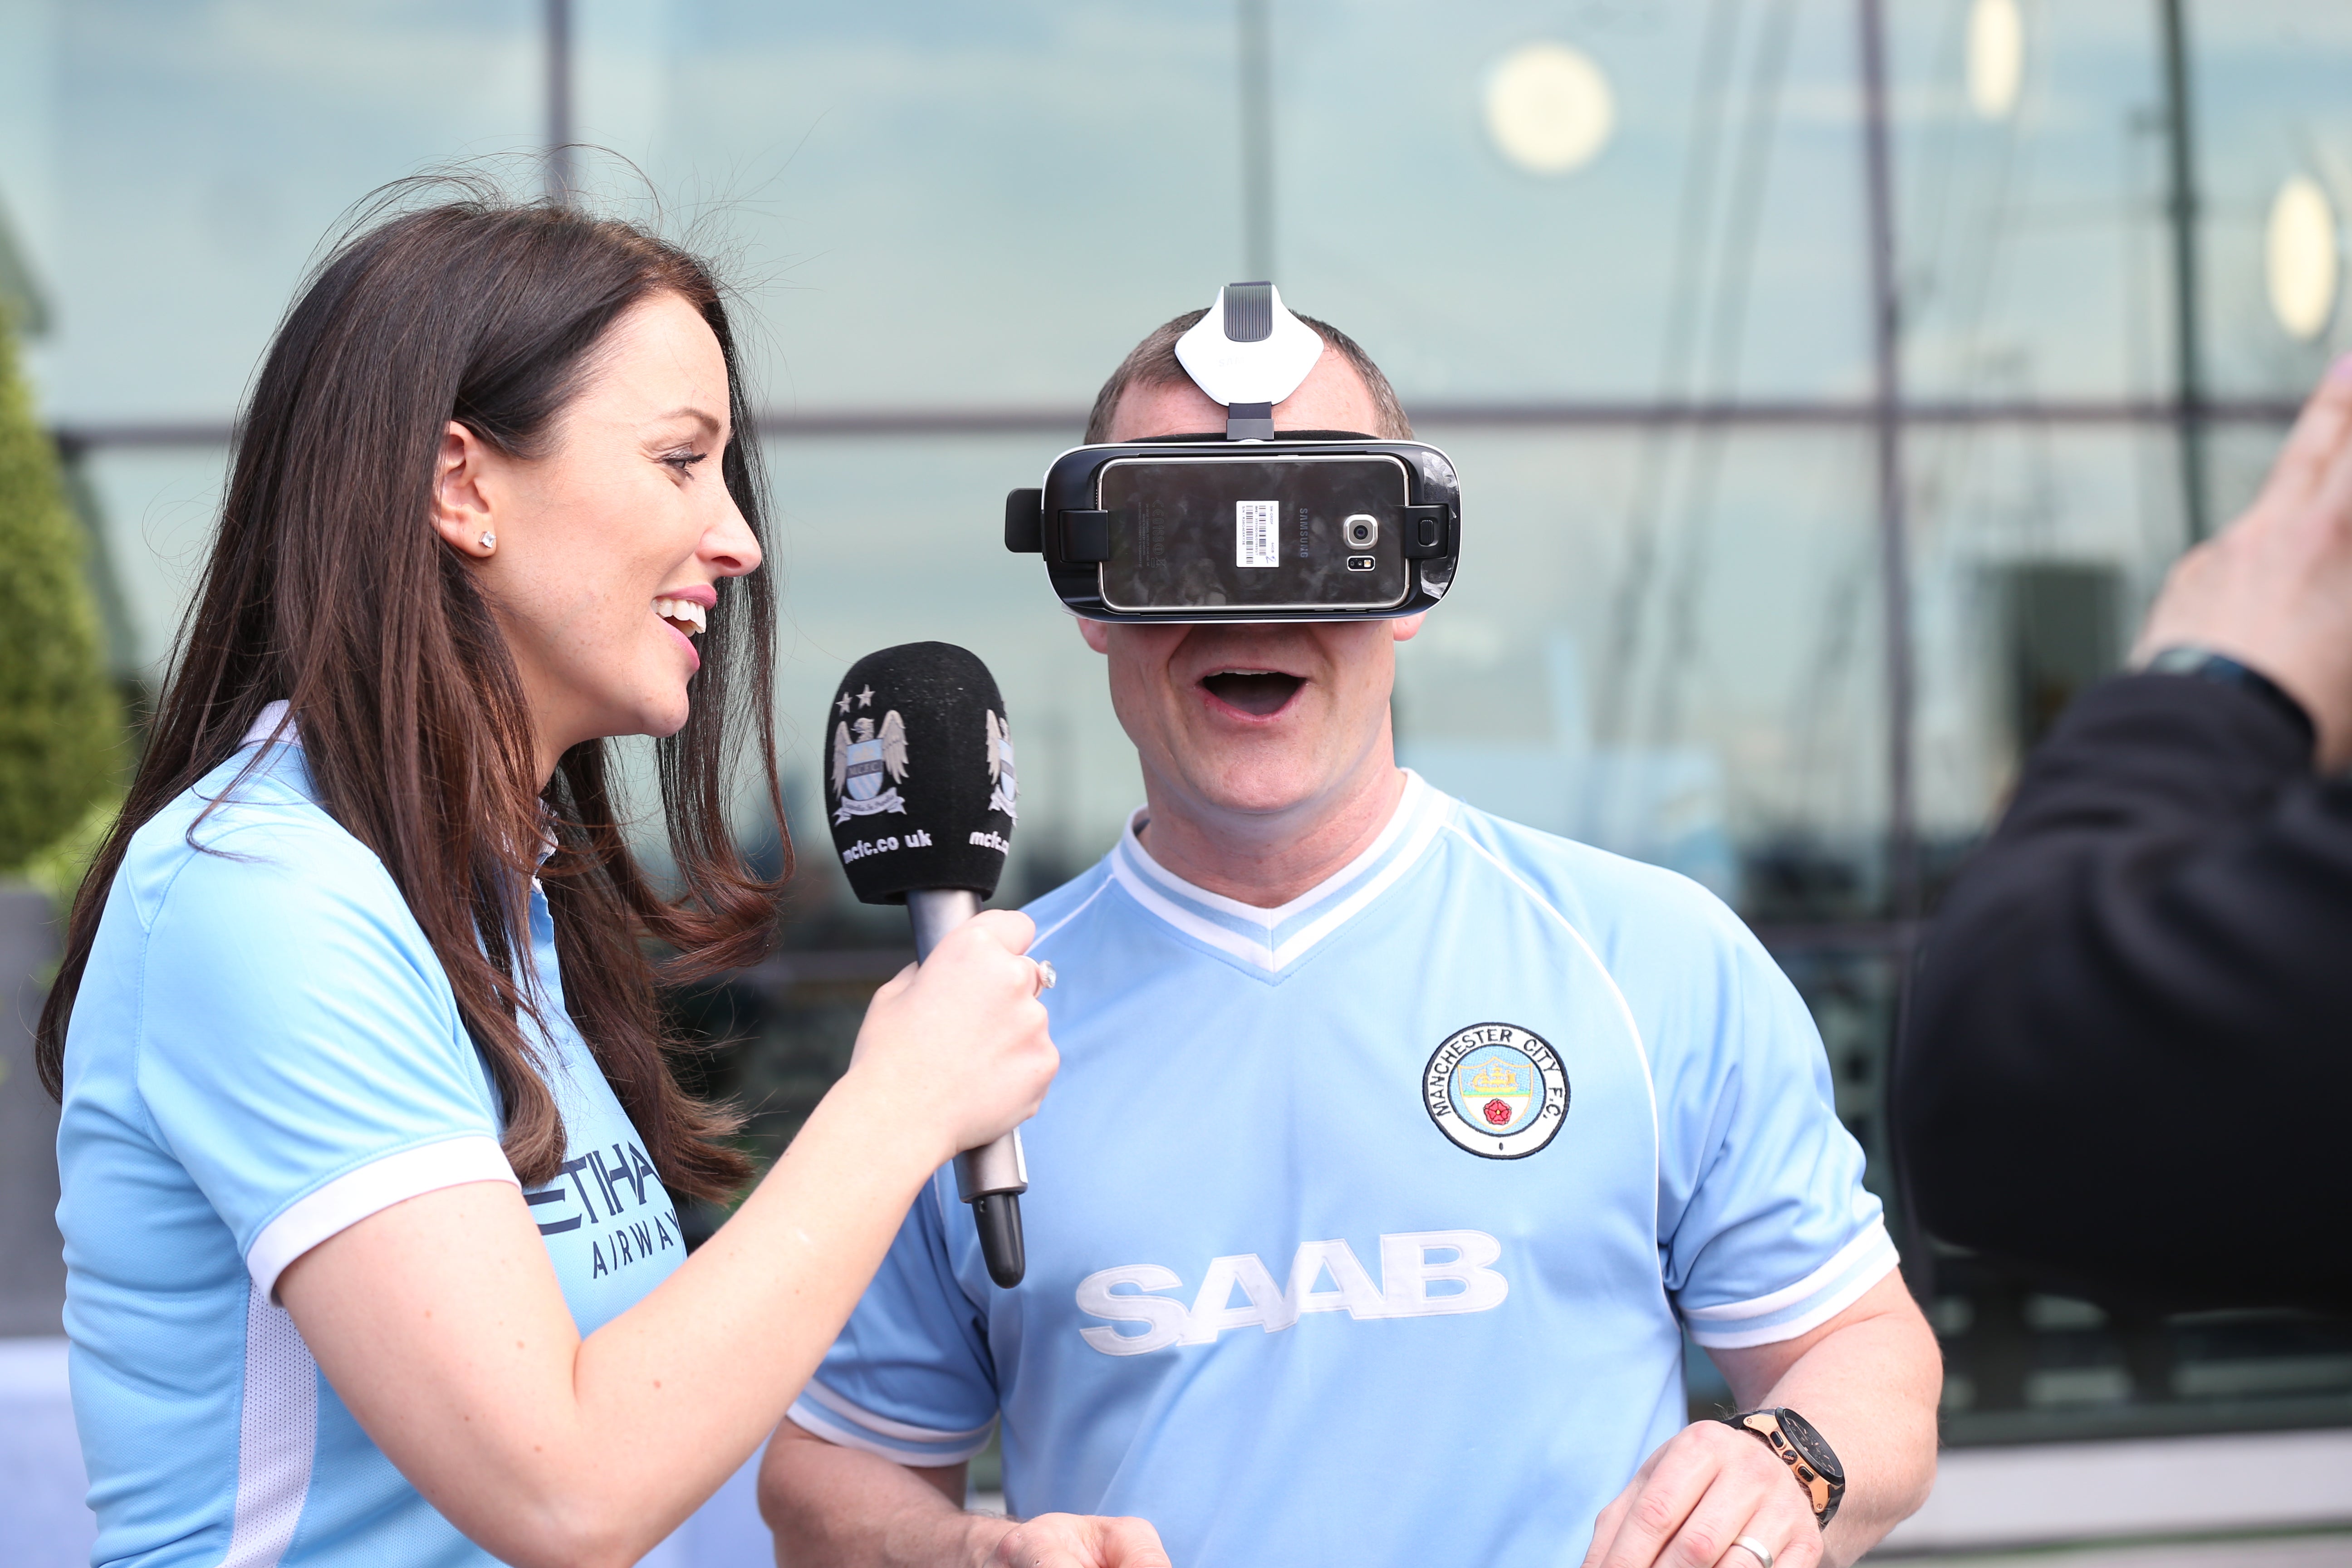 Will Man City score big with a virtual reality app?